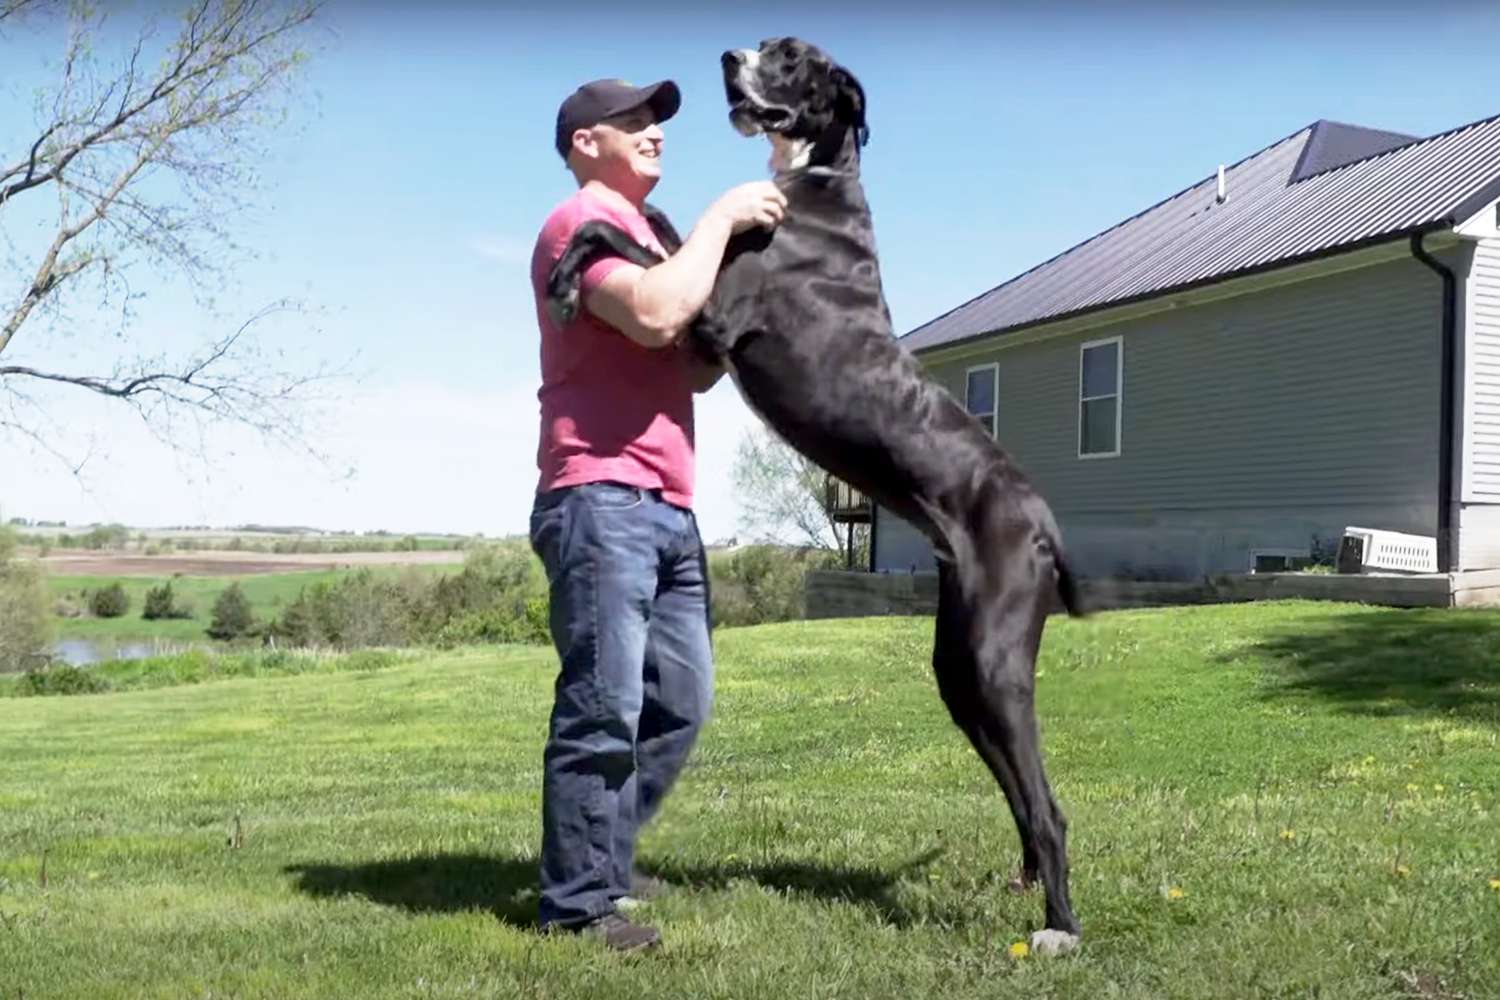 World’s Tallest Dog Dies Days After Getting Record: 'He Was Just the Best Giant Boy'